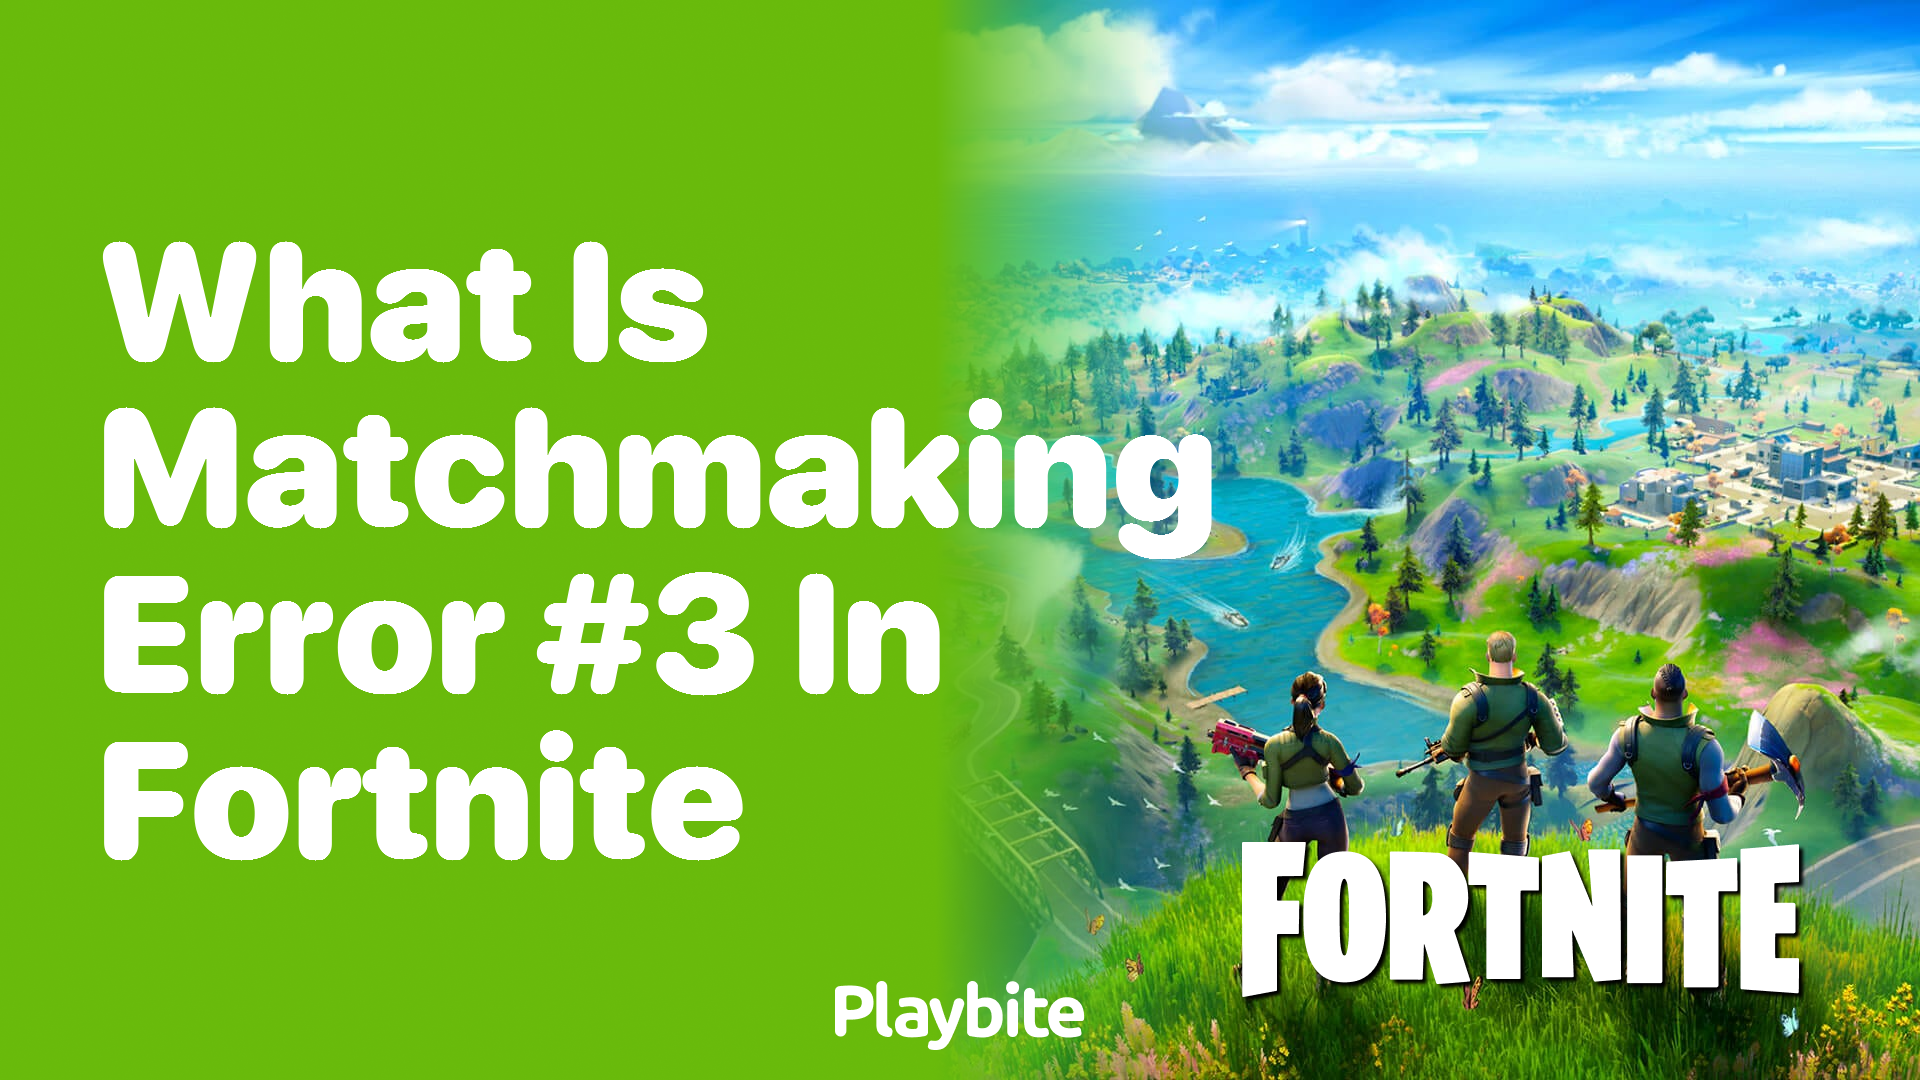 What is Matchmaking Error #3 in Fortnite?